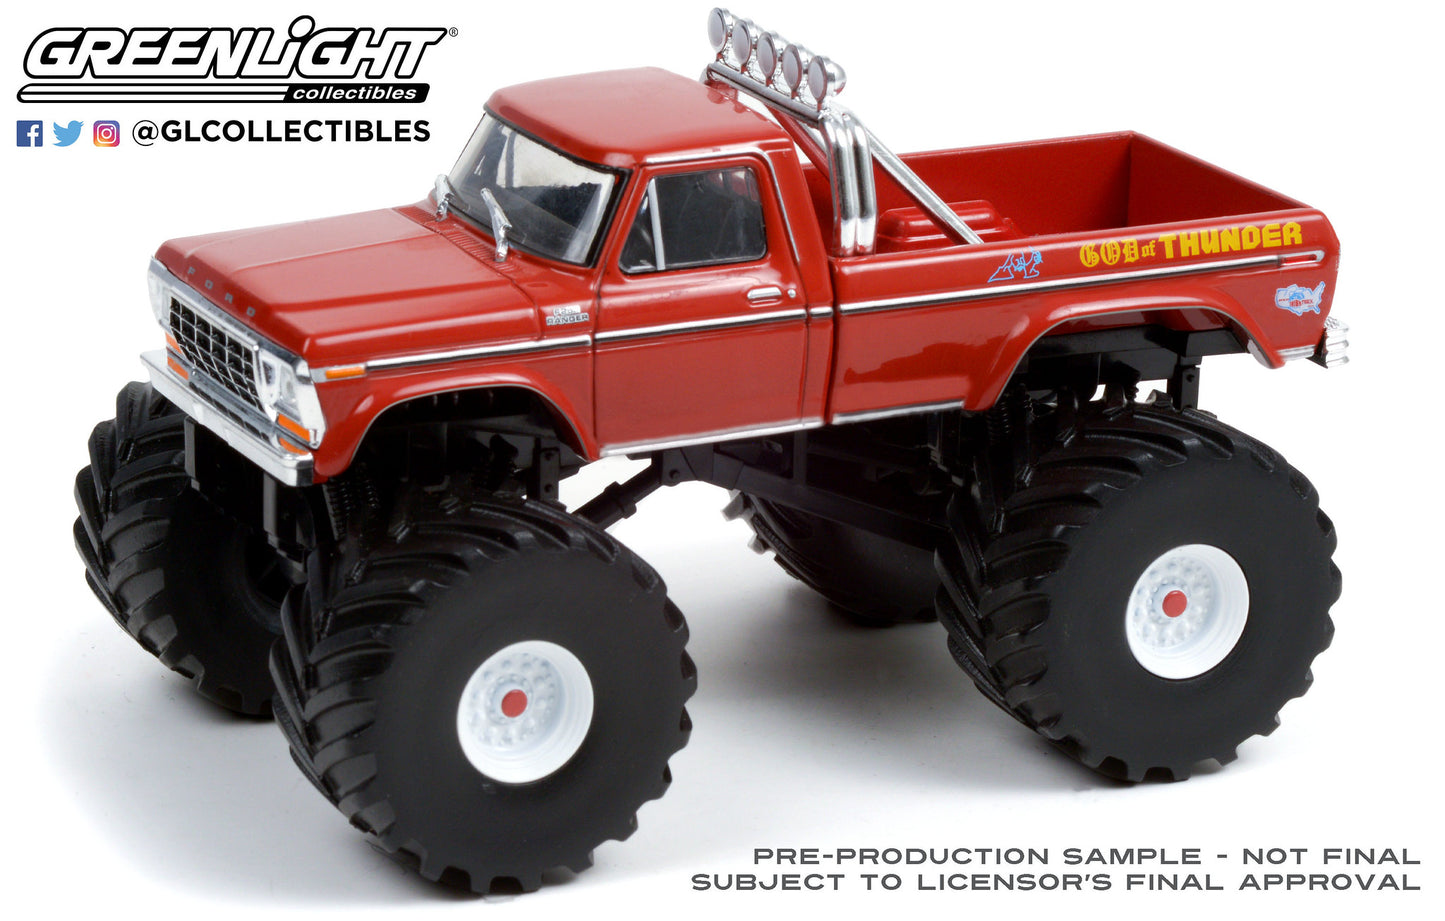 1:43 Kings of Crunch - God of Thunder - 1979 Ford F-250 Monster (with 66-Inch Tires)